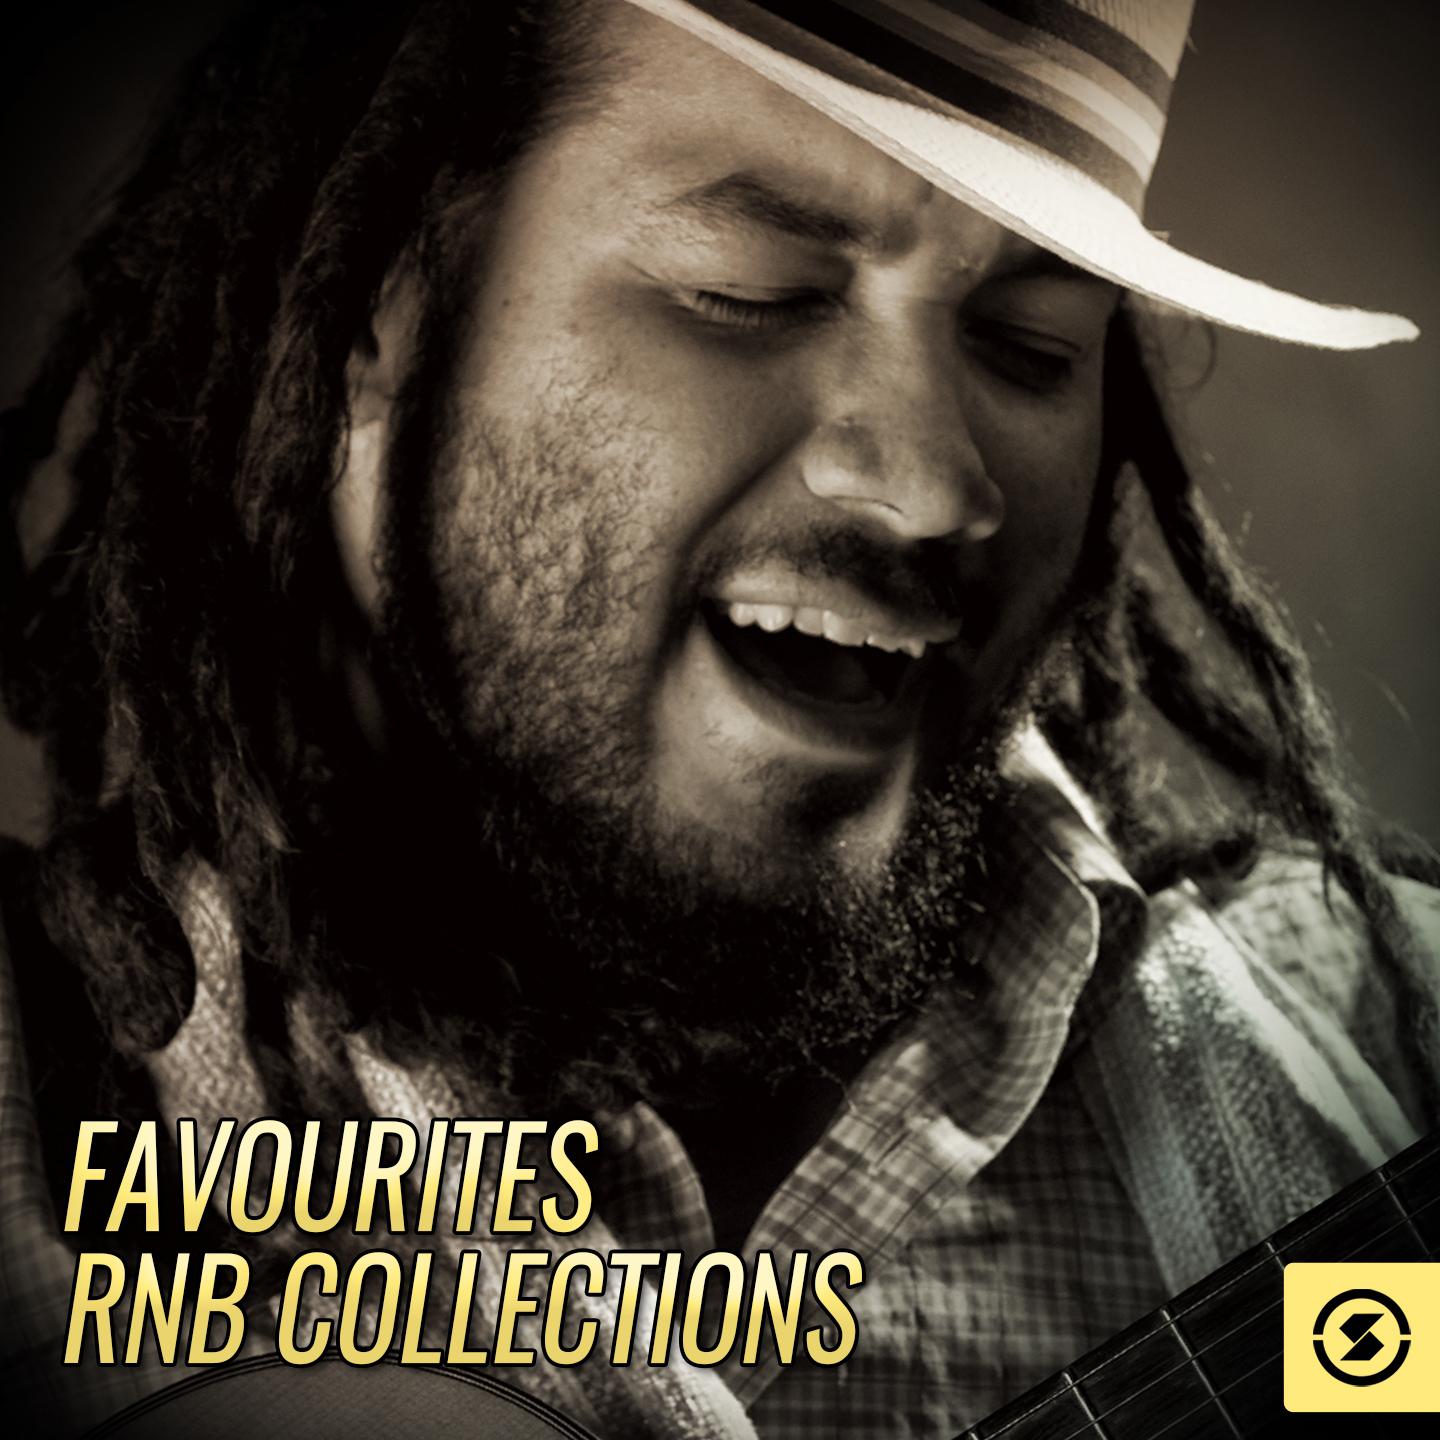 Favourites RnB Collections